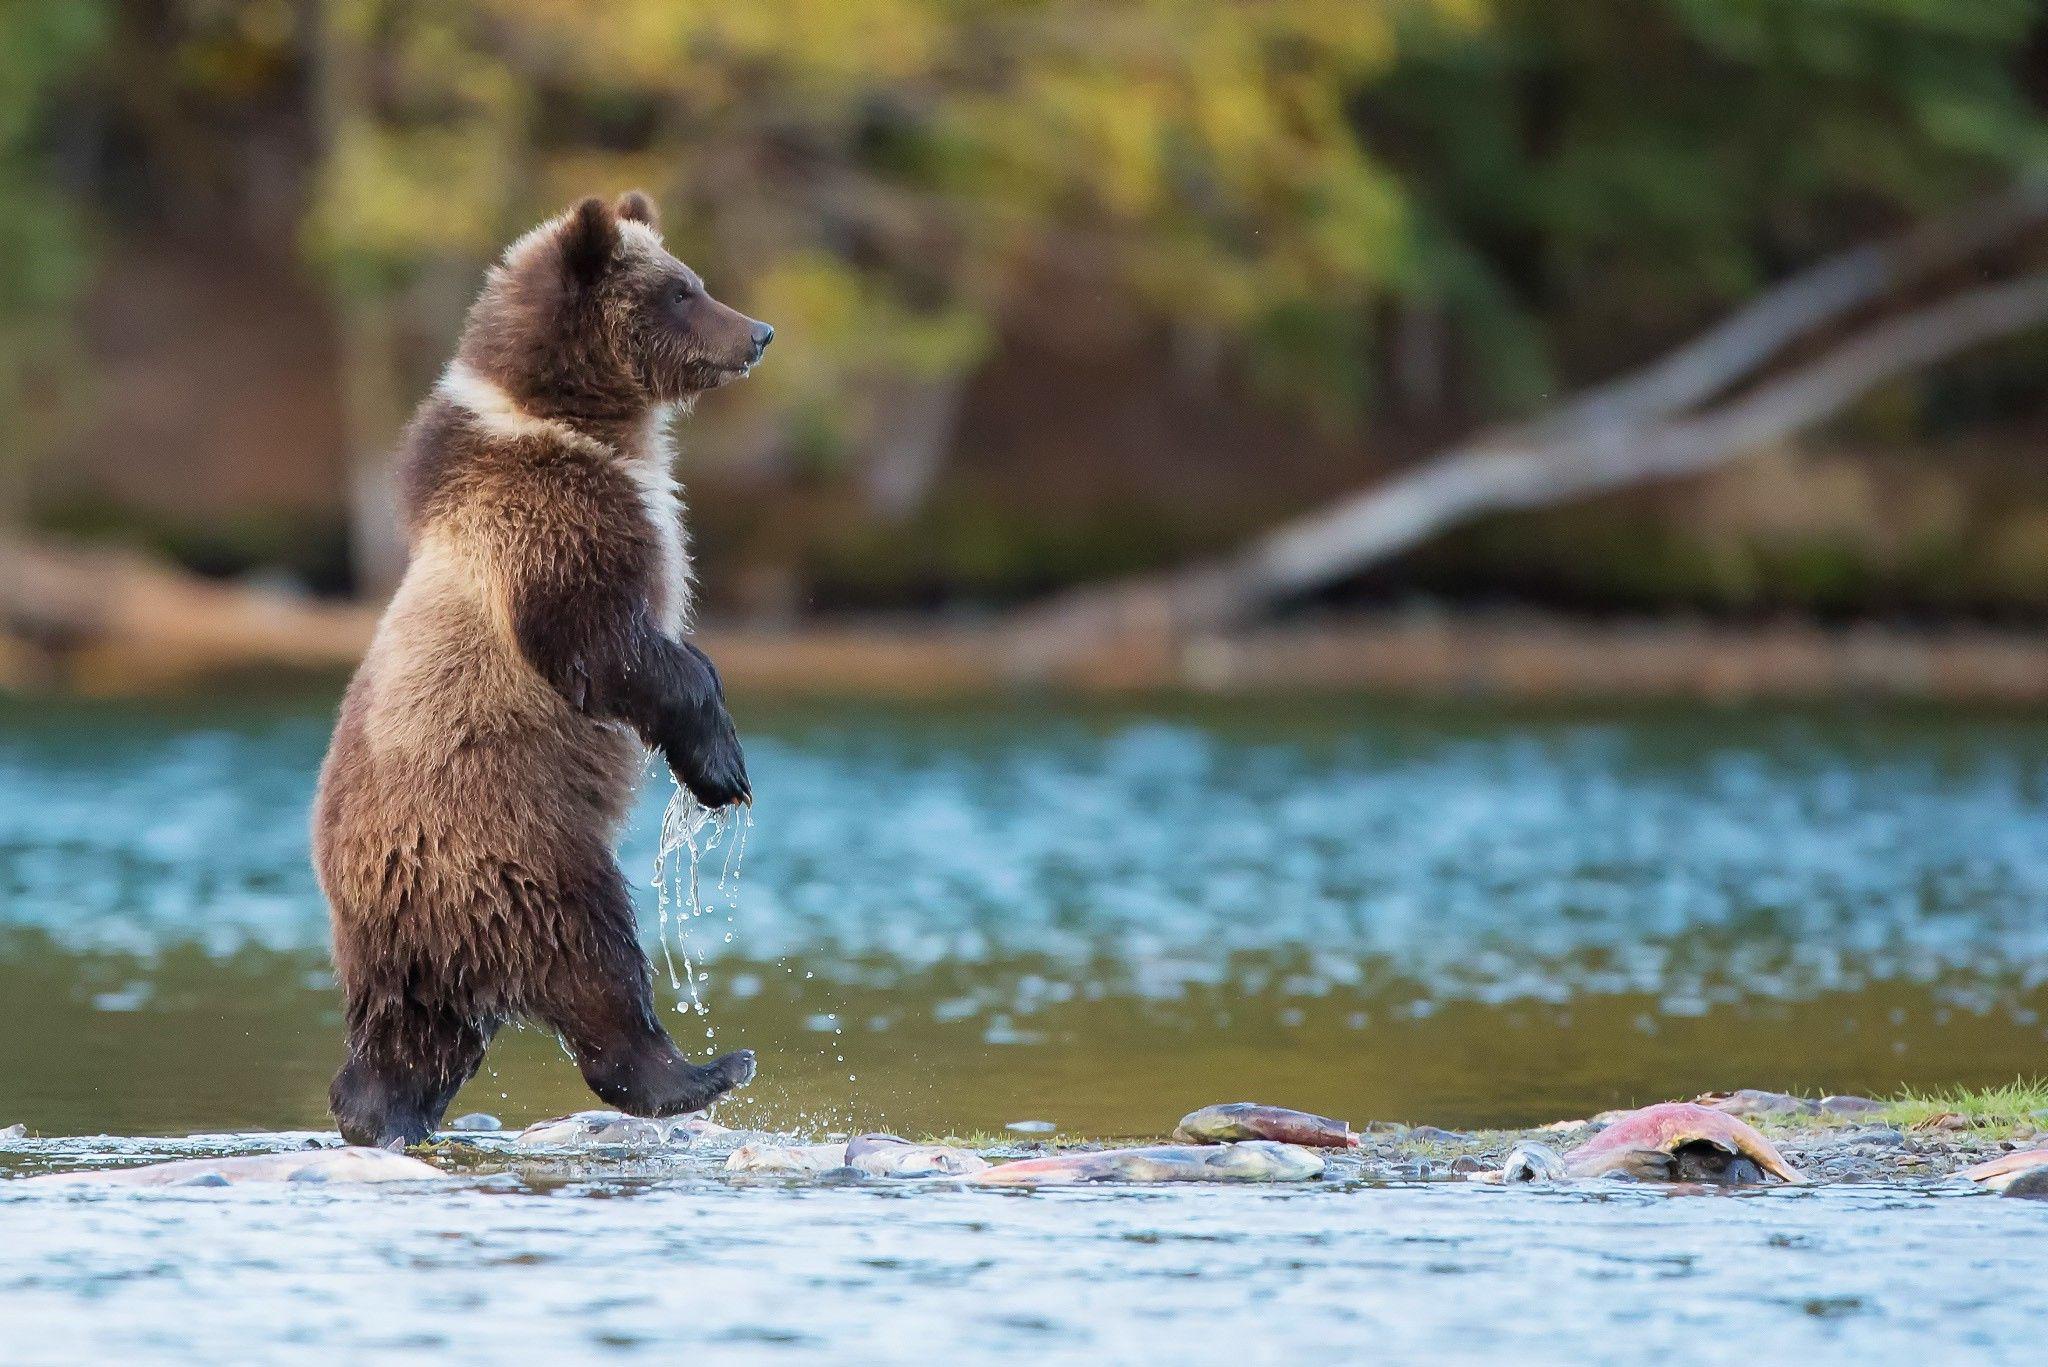 bears nature animals river baby animals grizzly bears grizzly bear